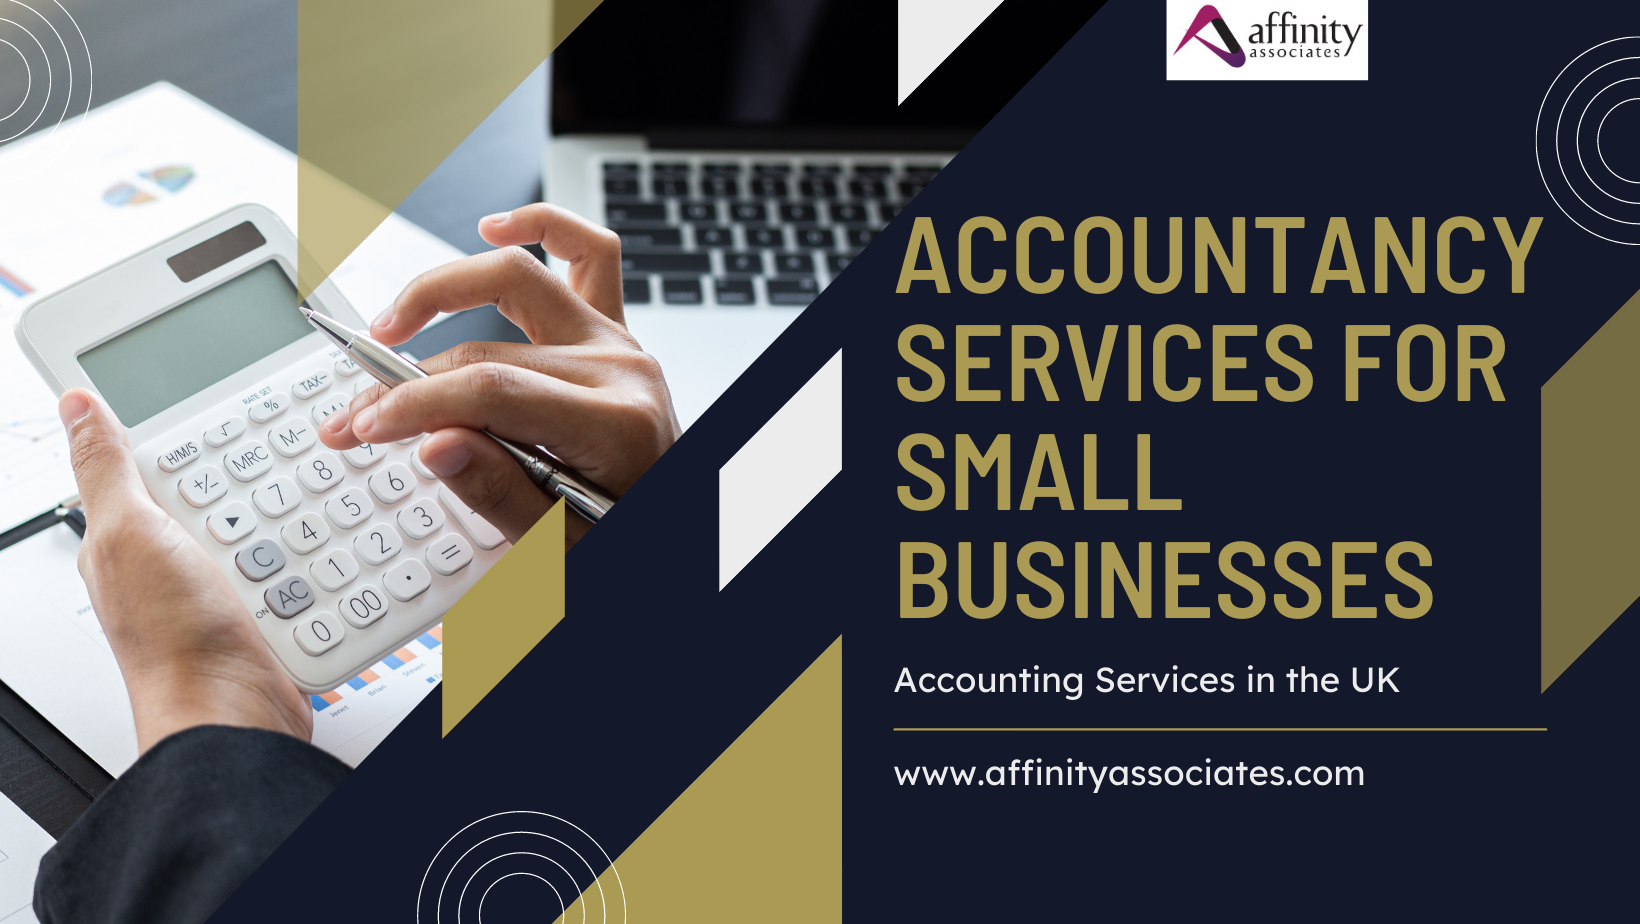 Accountancy Services for Small Businesses – We Offer End-to-End Accounting Services in the UK